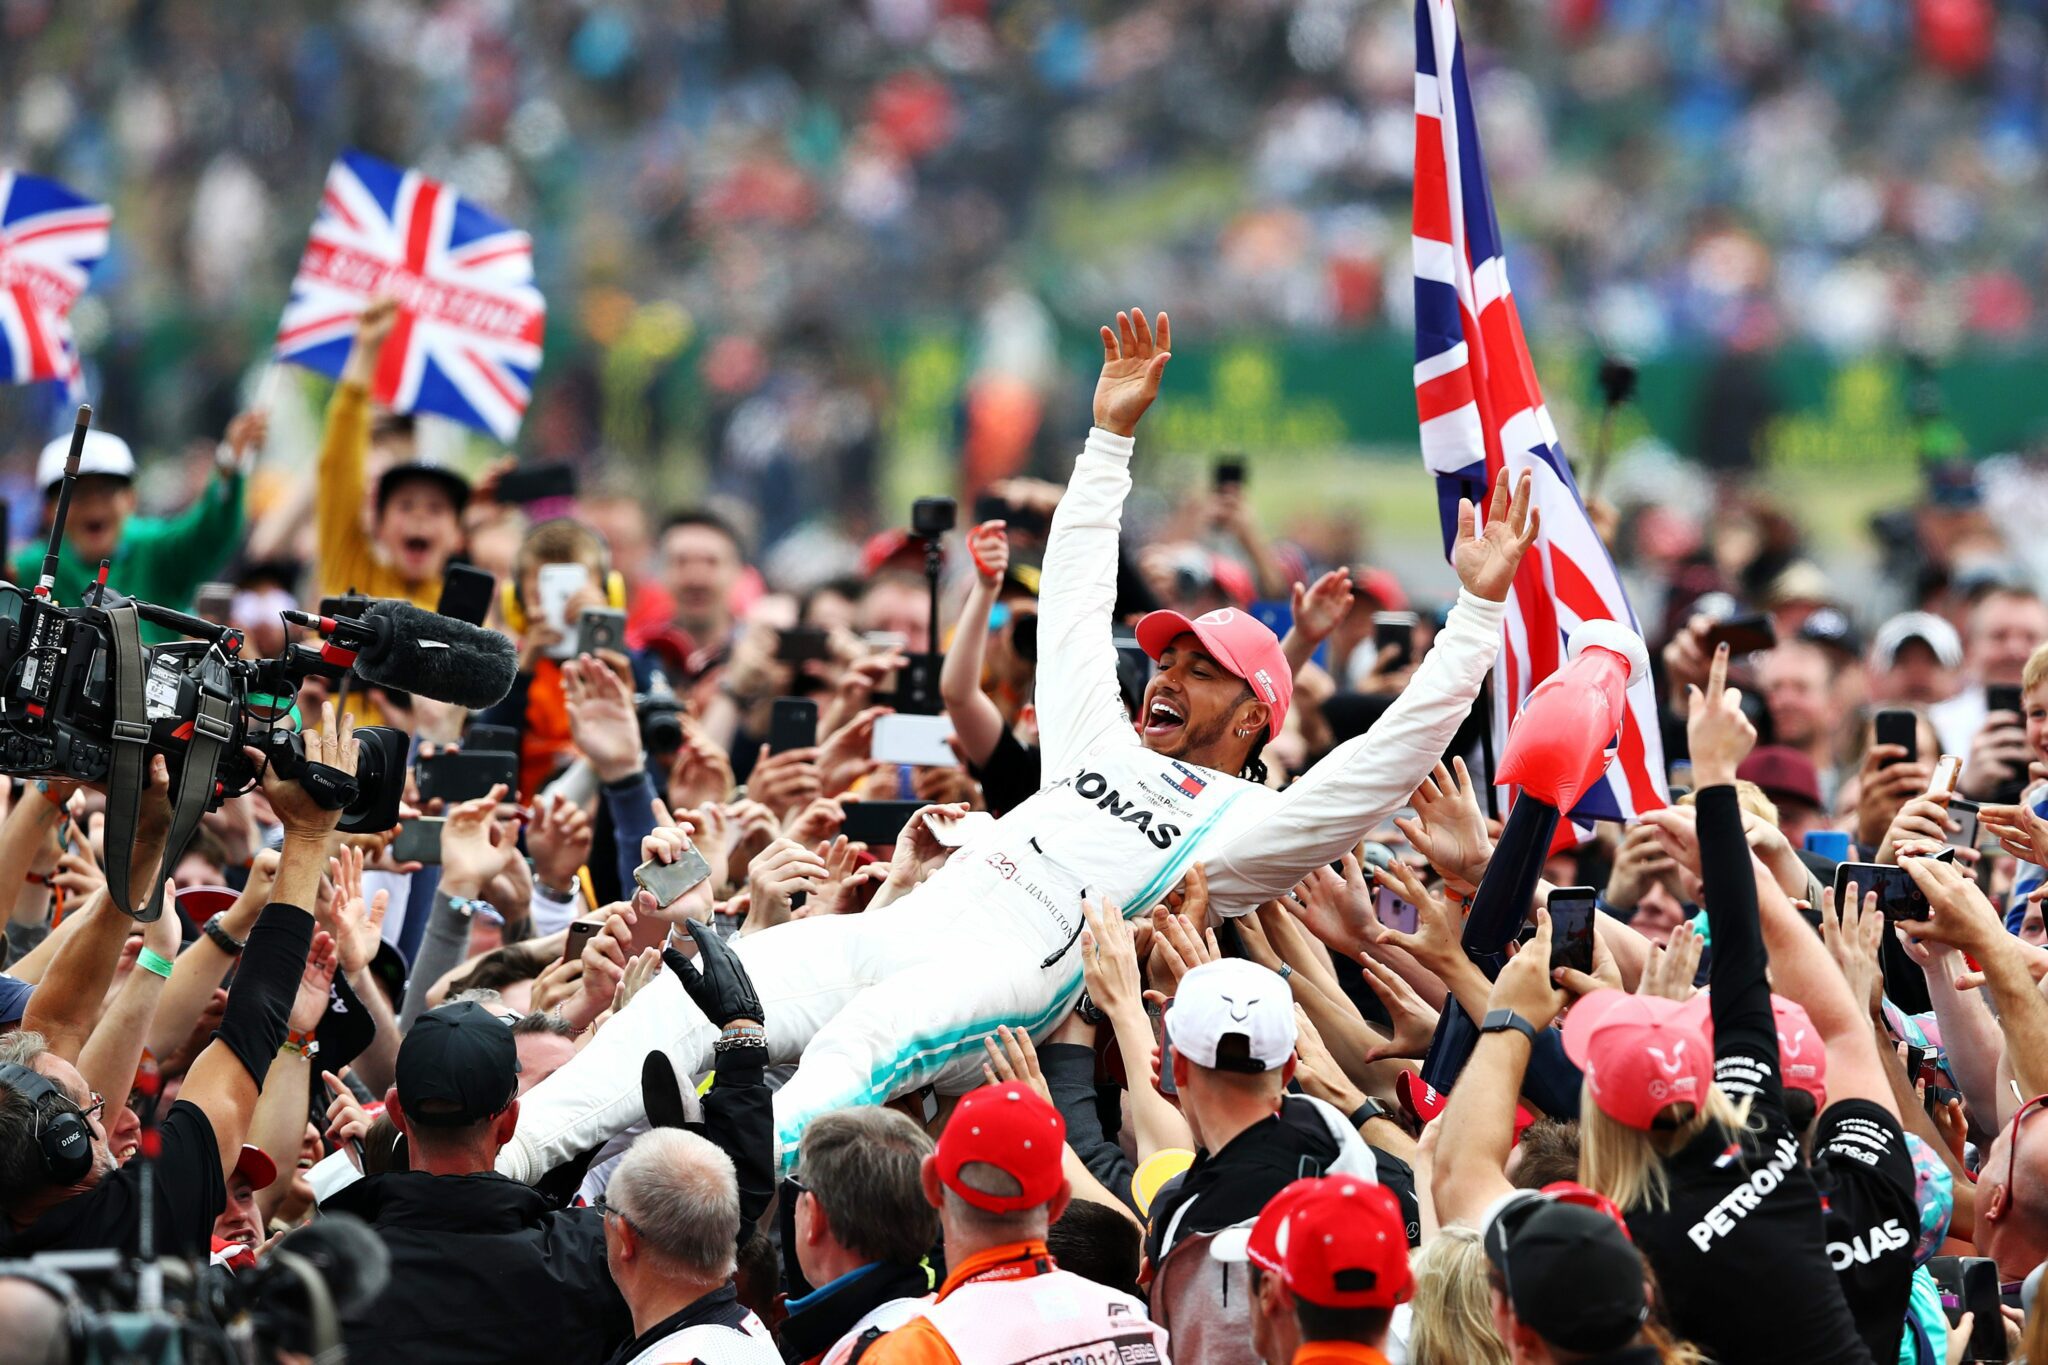 Image of Lewis Hamilton being lifted up by the crowd with british flags held up